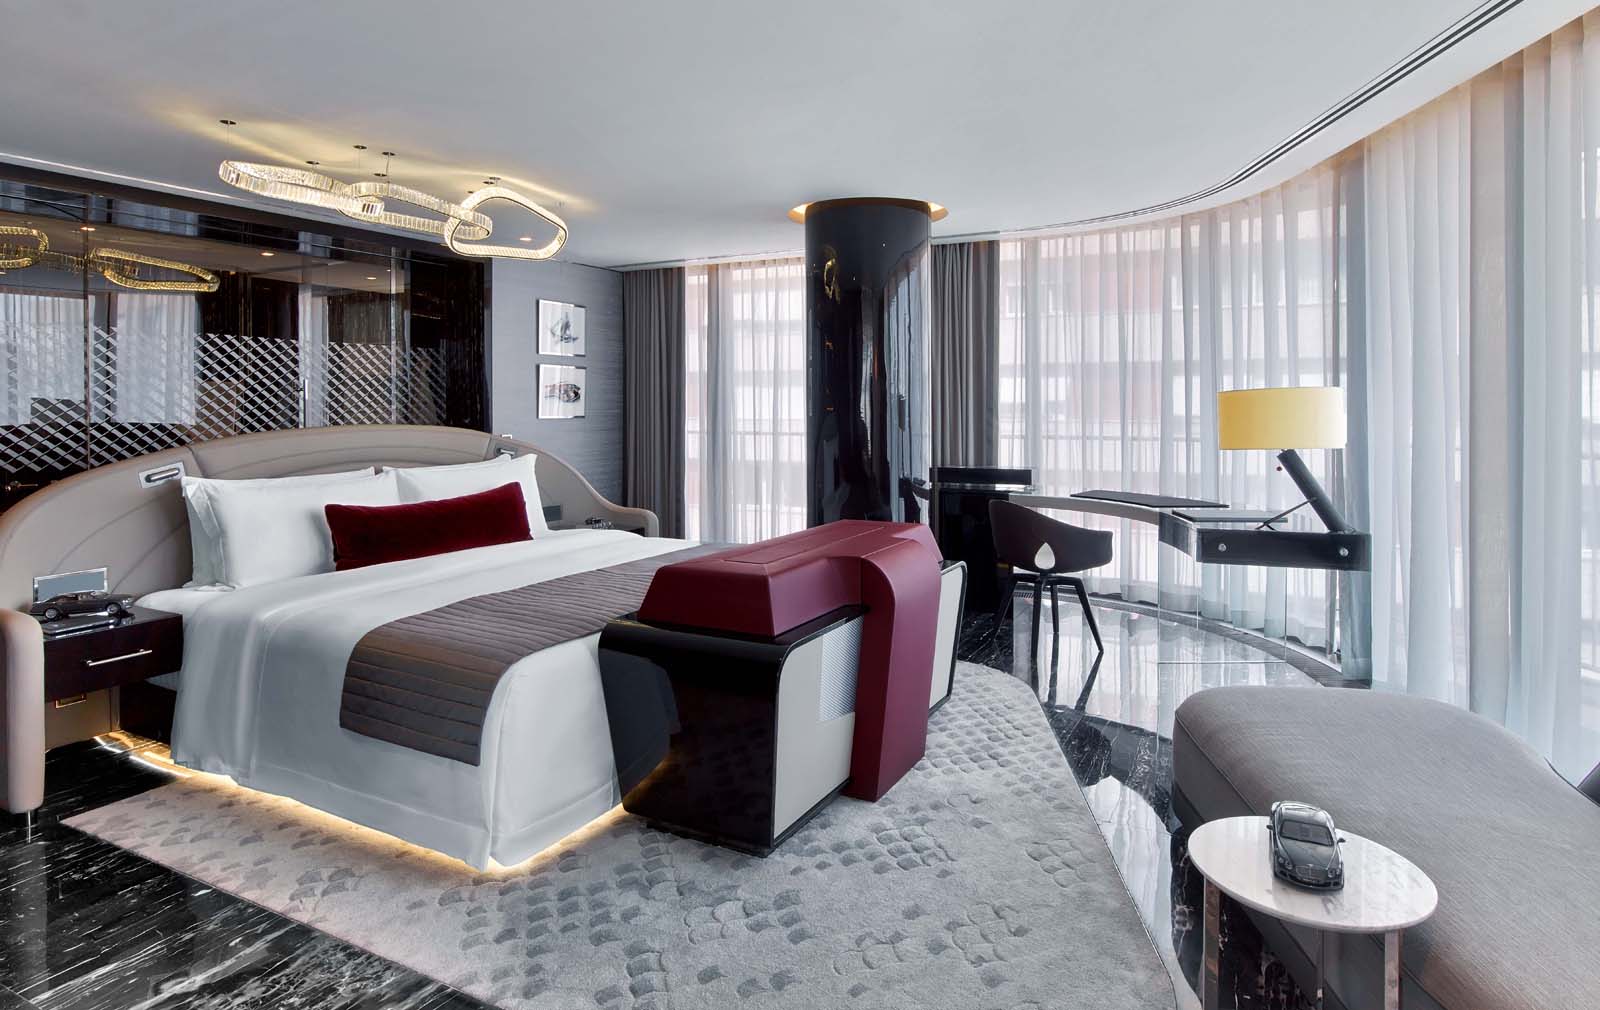 new-bentley-suite-debuts-at-the-st-regis-istanbul7